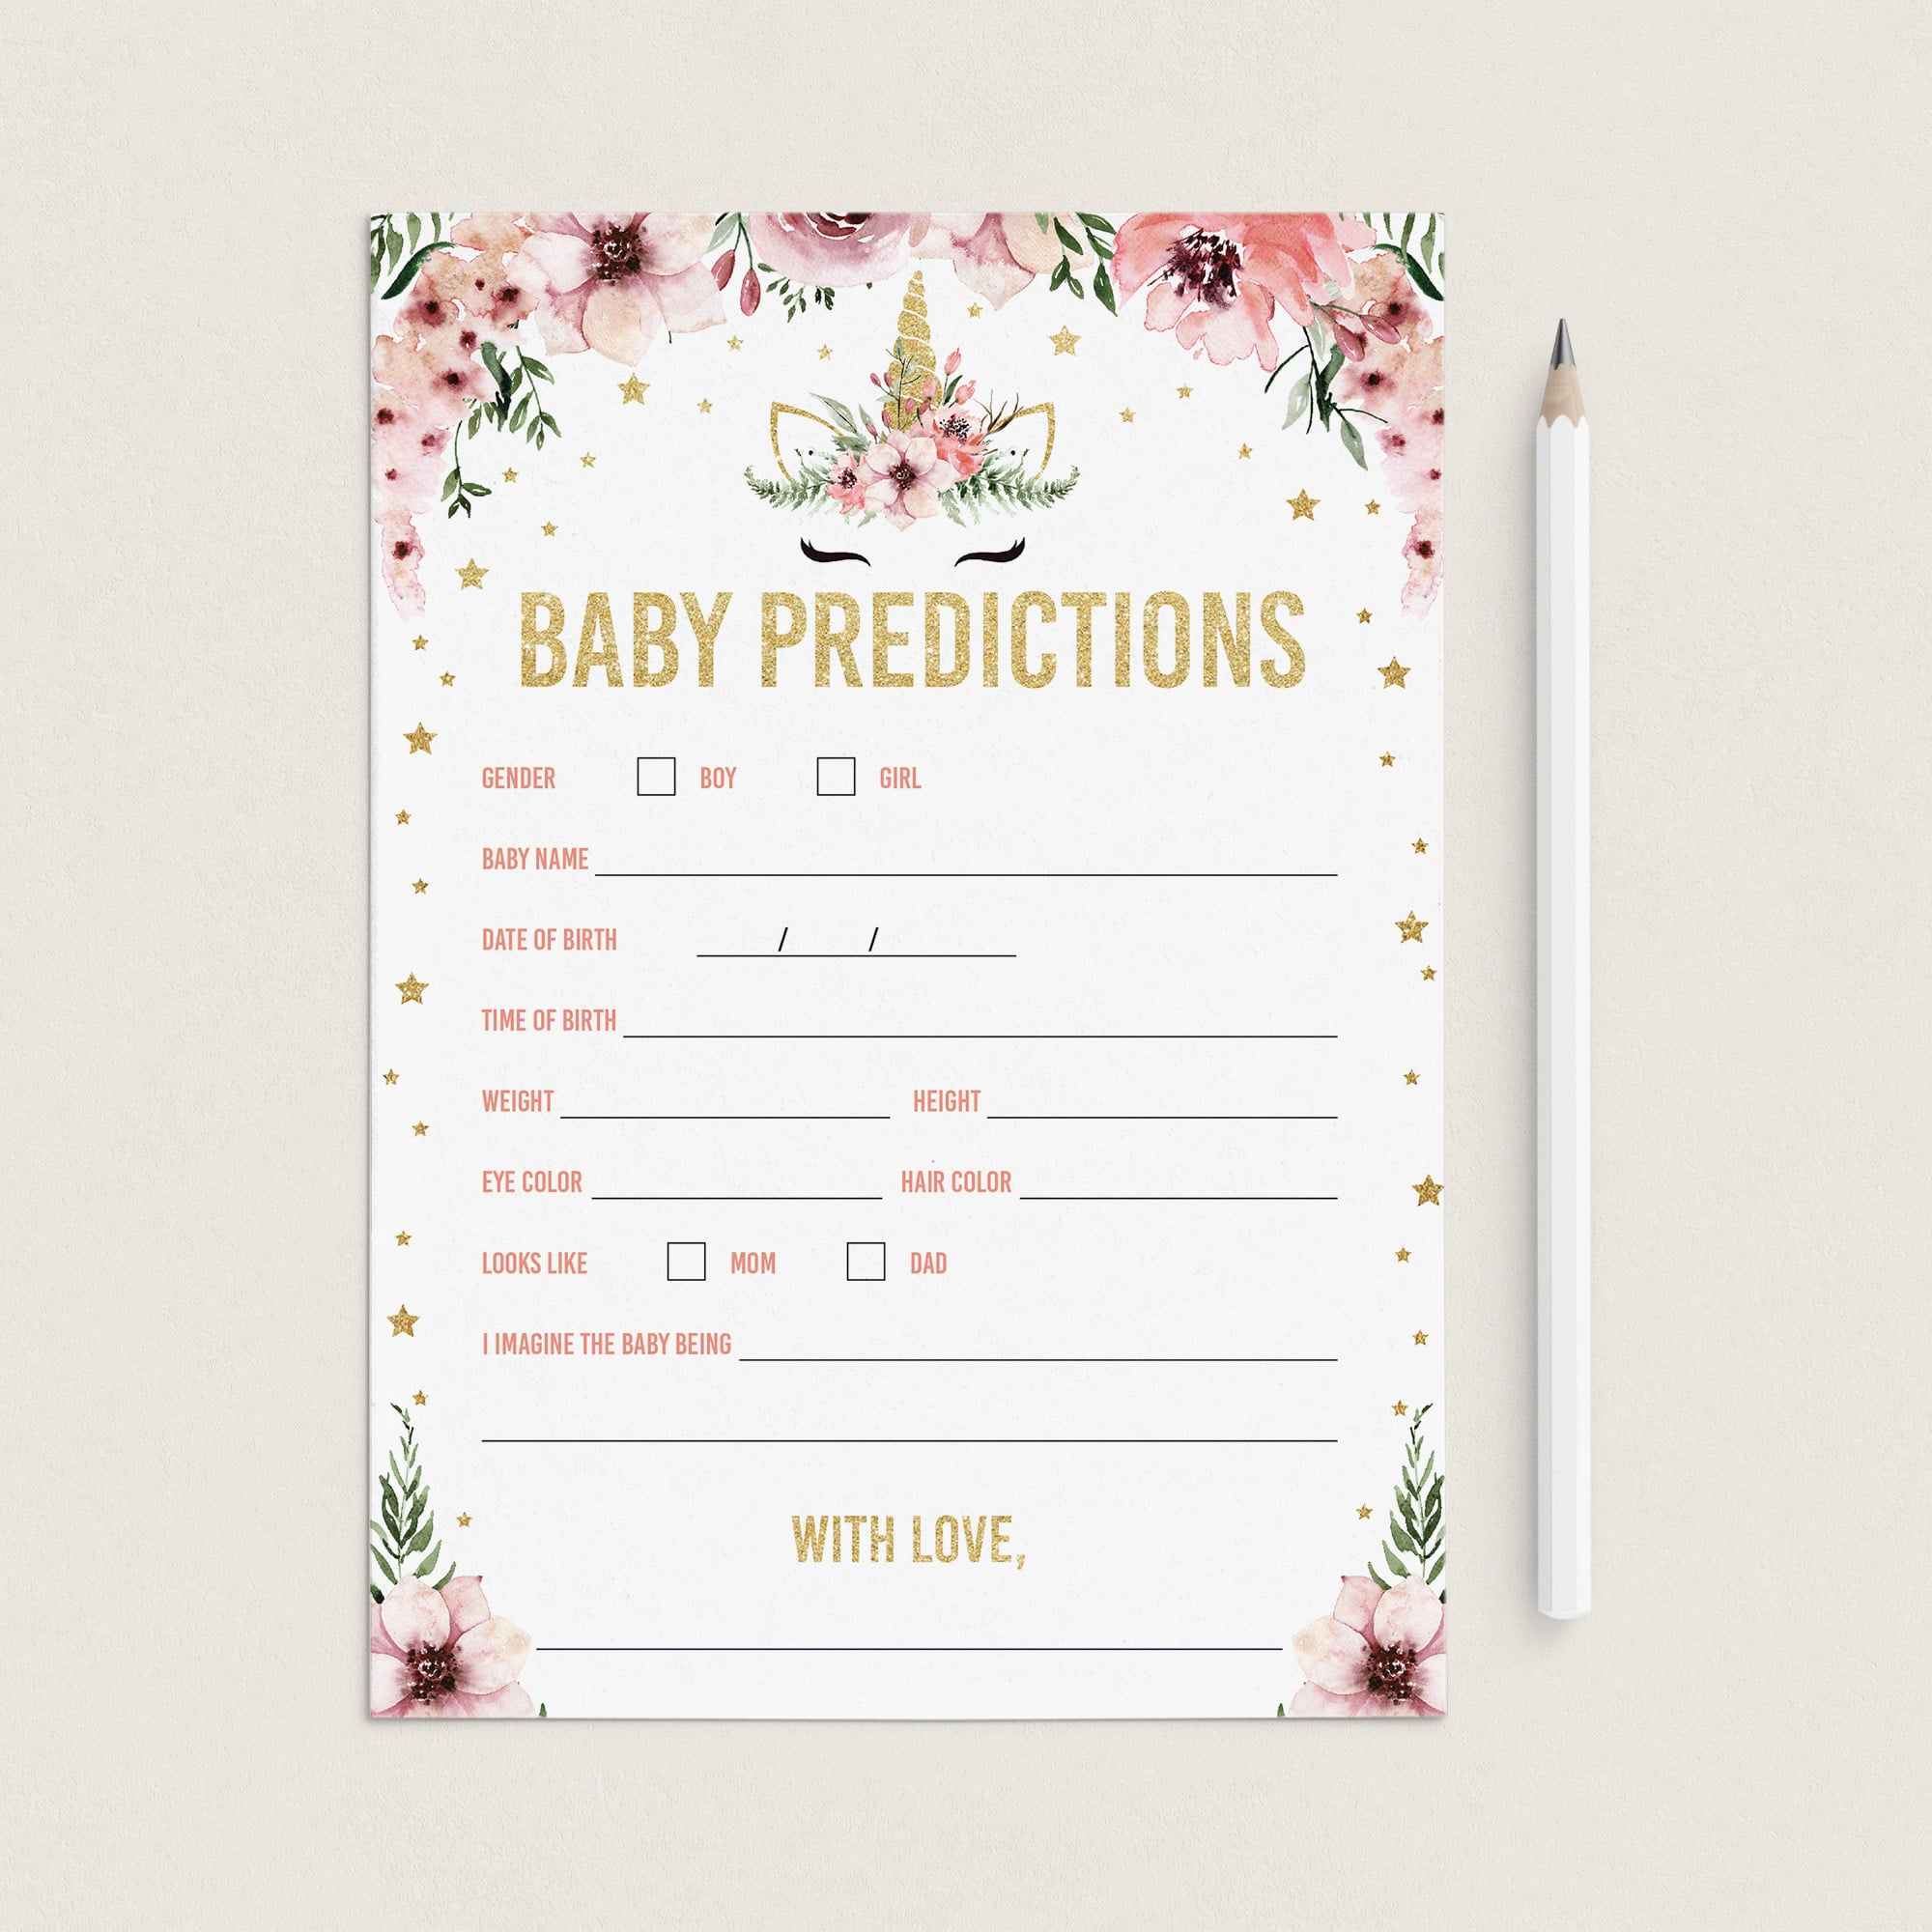 Printable floral unicorn baby predictions game by LittleSizzle